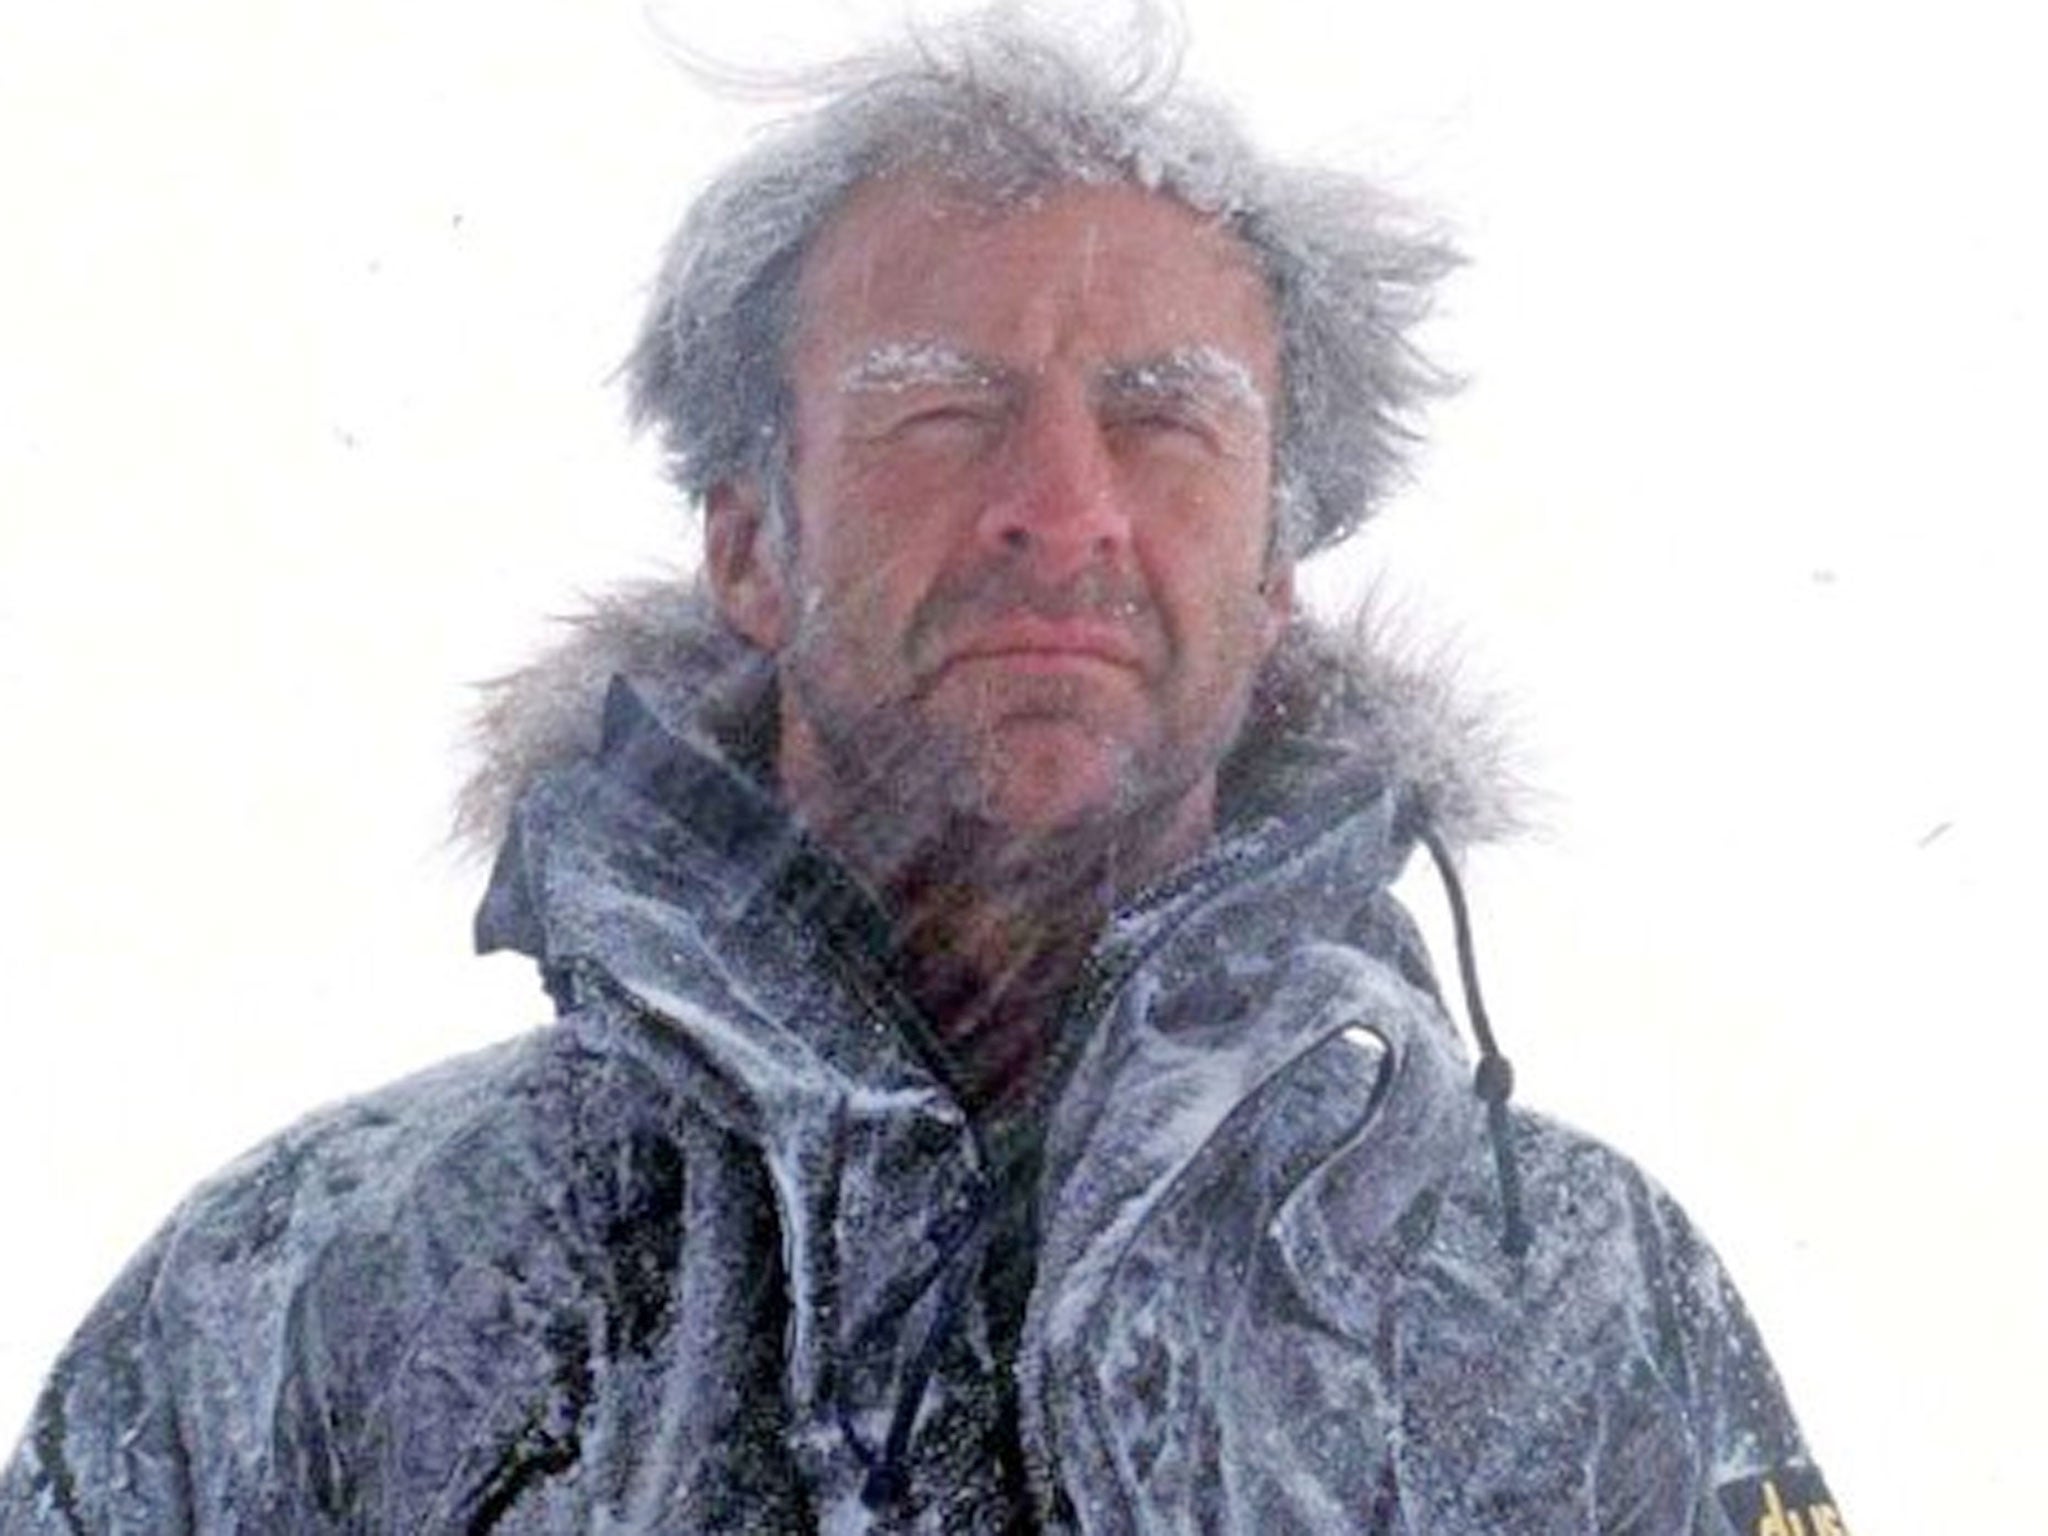 The British adventurer Sir Ranulph Fiennes had to use his bare hands in temperatures as low as -30C to fix a ski binding after a training mishap